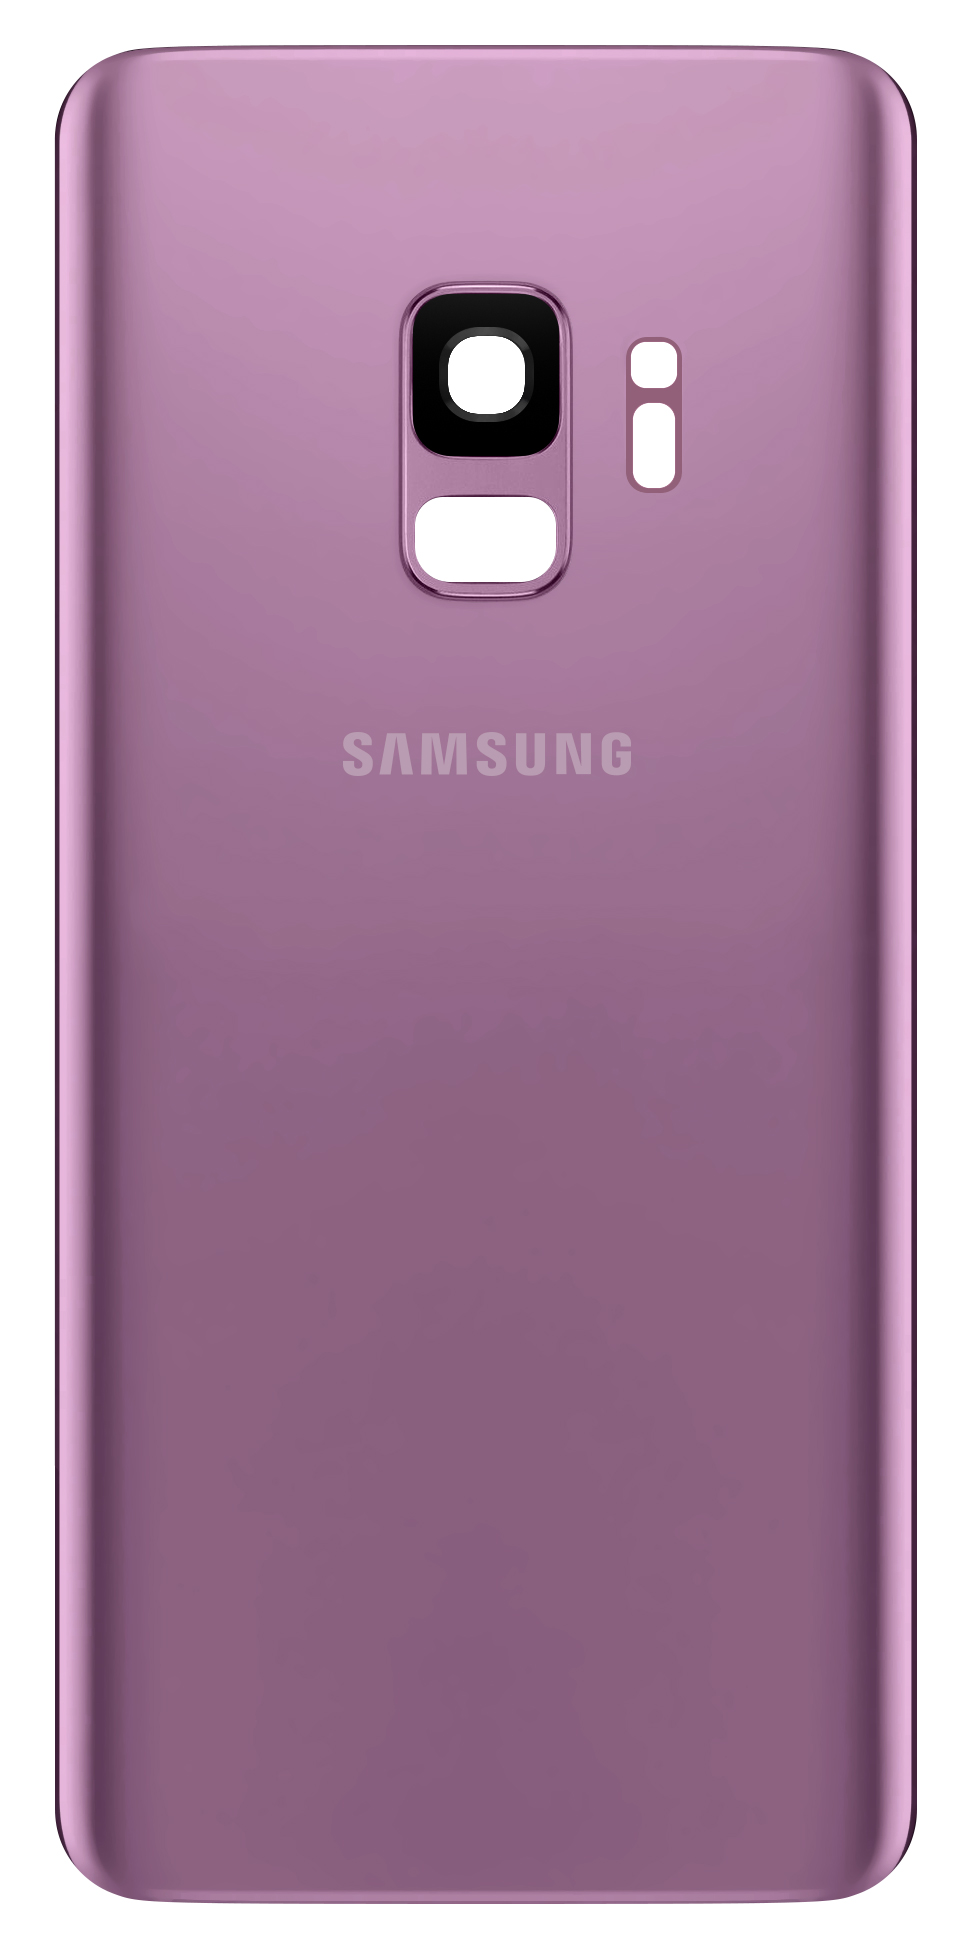 Battery Cover for Samsung Galaxy S9 G960, Lilac Purple